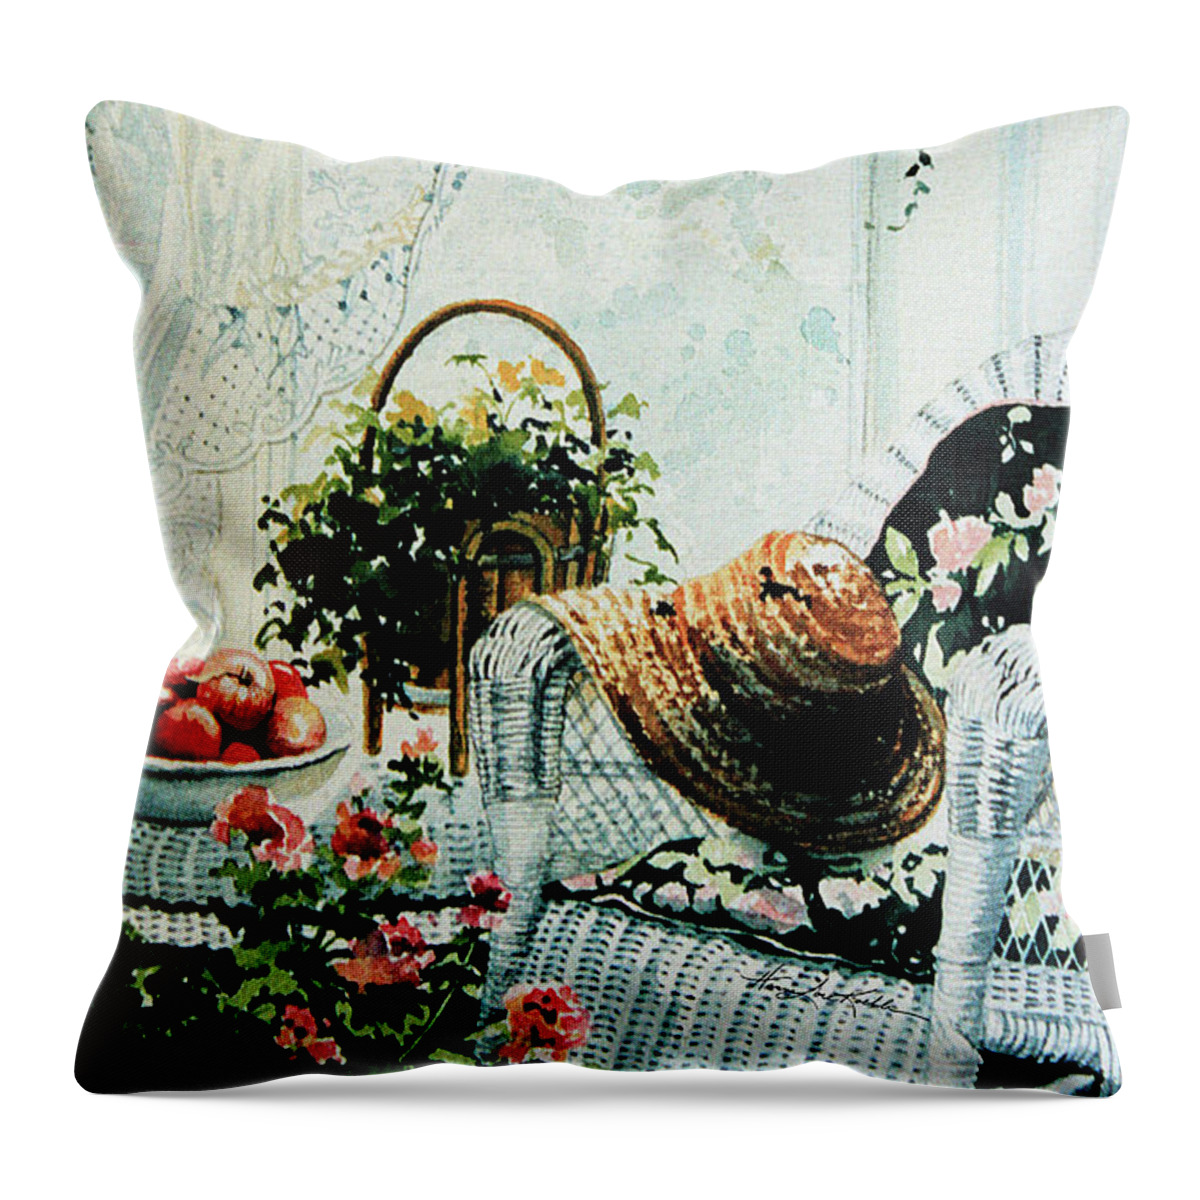 Garden Room Still Life Throw Pillow featuring the painting Rest From Garden Chores by Hanne Lore Koehler